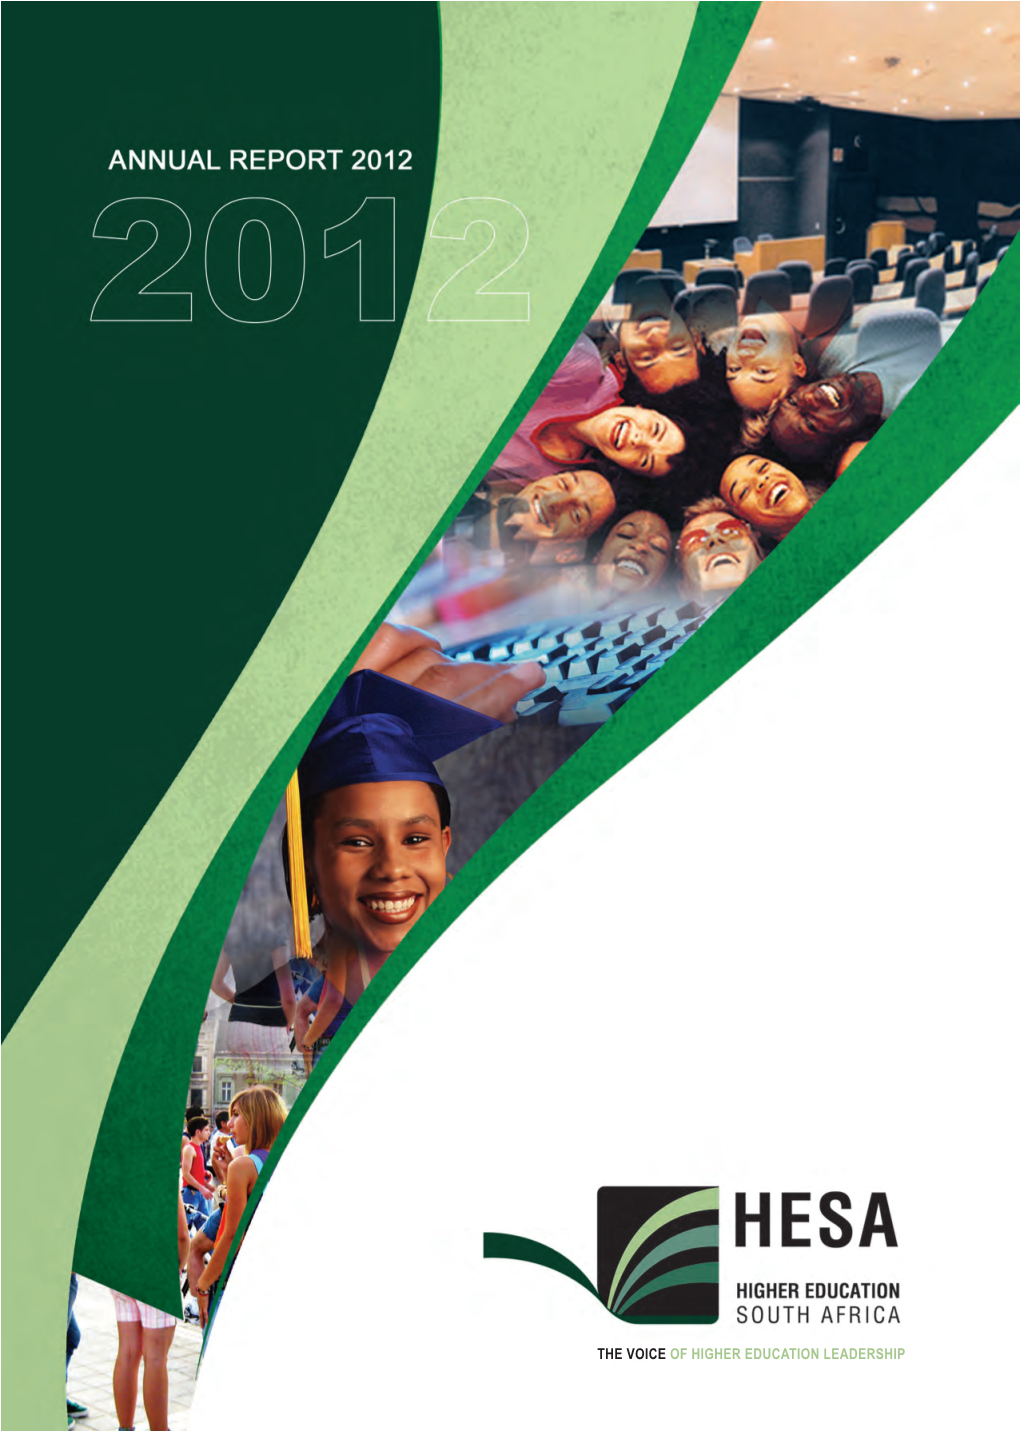 To Download HESA Annual Report 2012